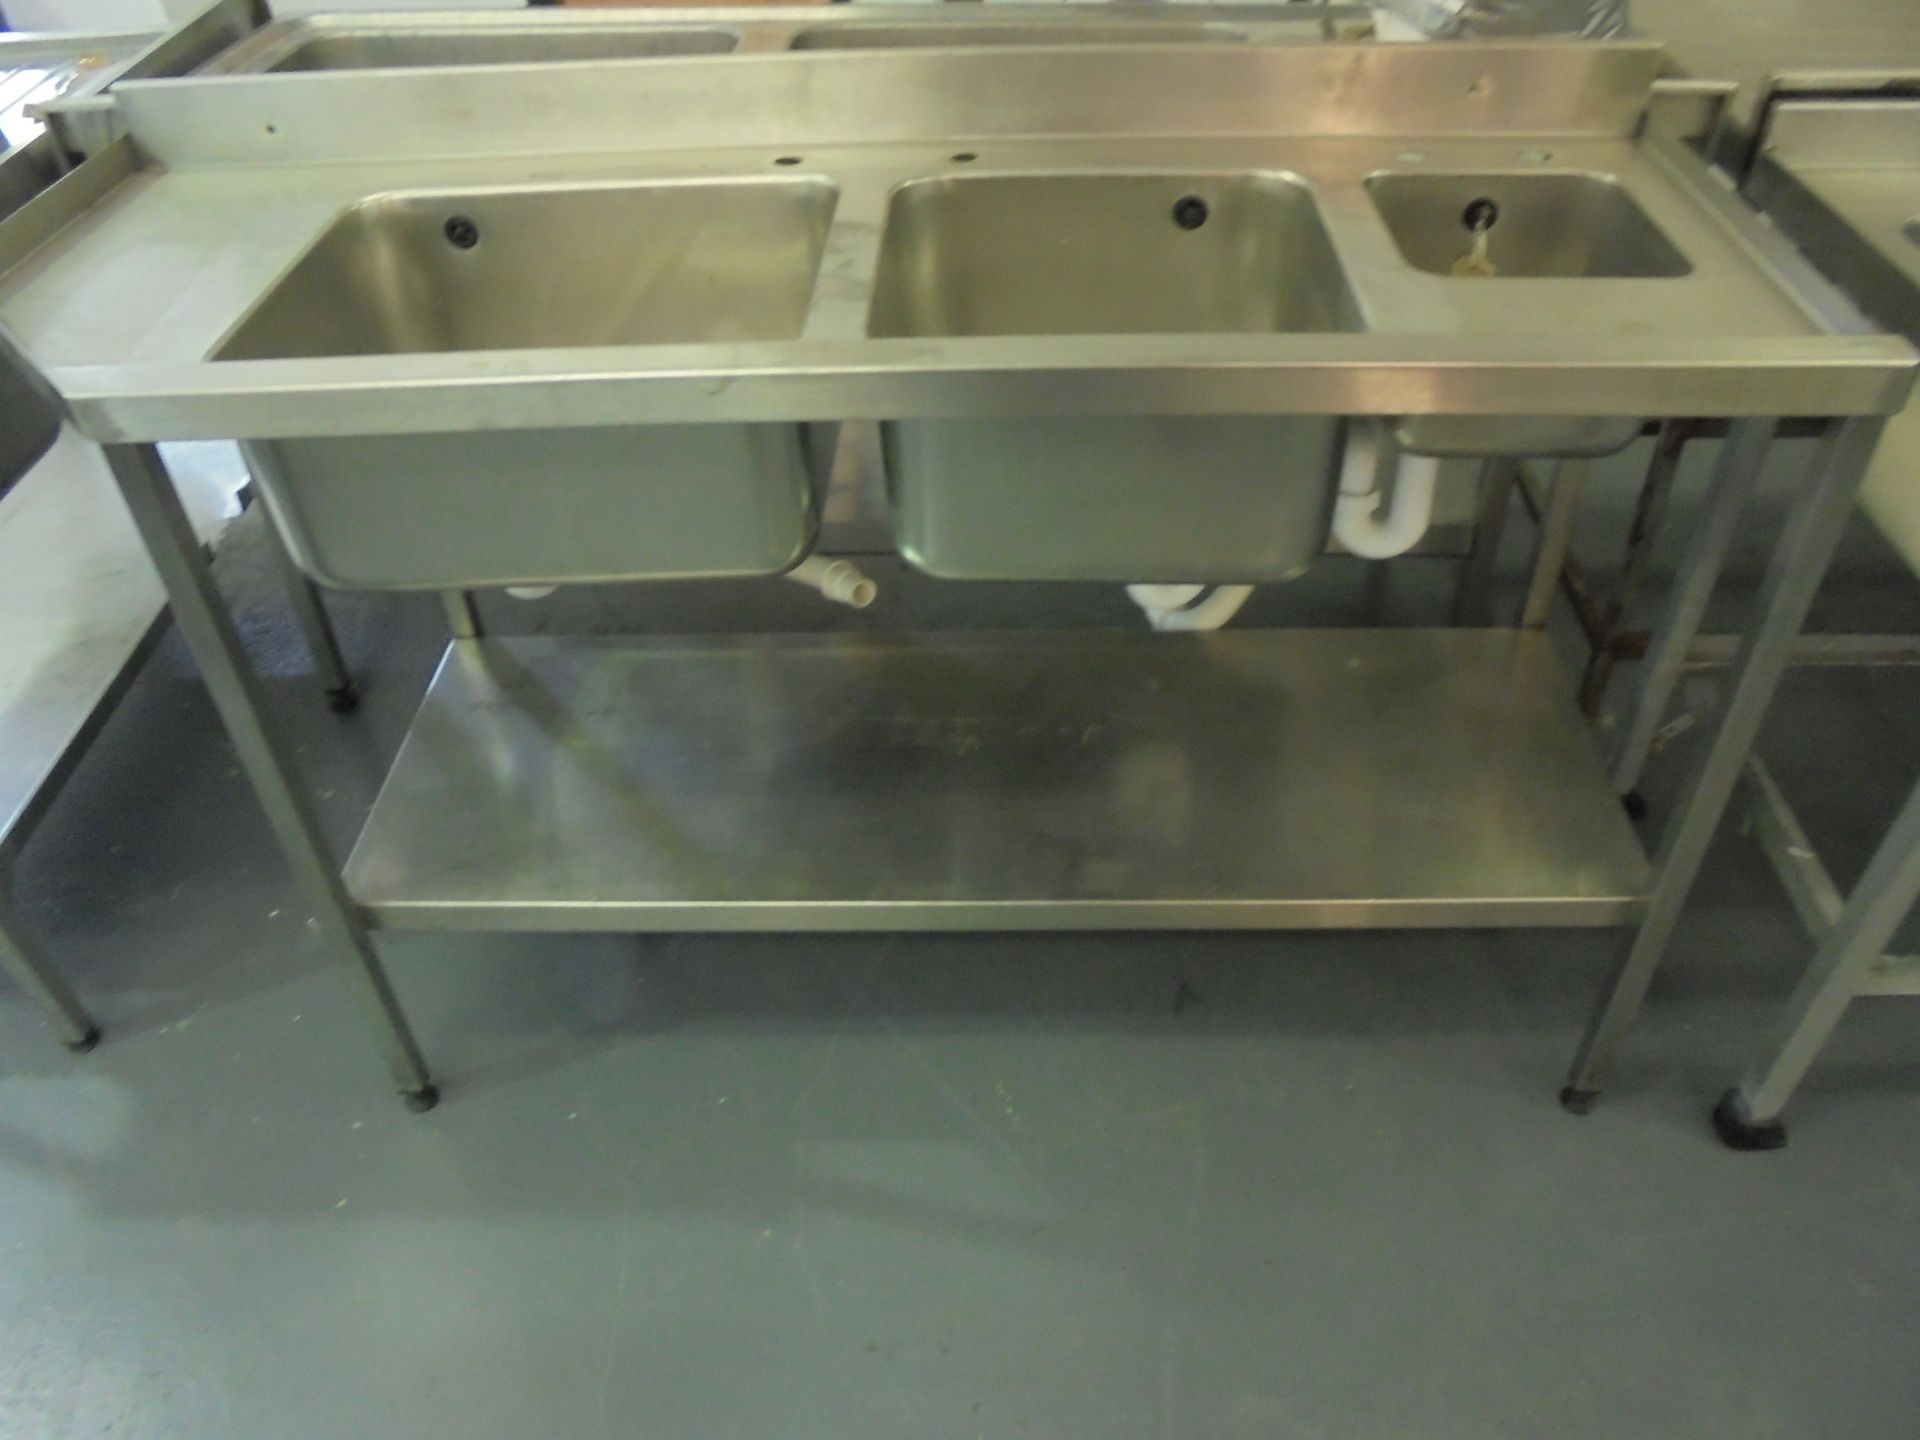 Stainless Steel Commercial Double Bowl Sink with Hand Basin & Shelf Under. Size (H) 90cm x (D)